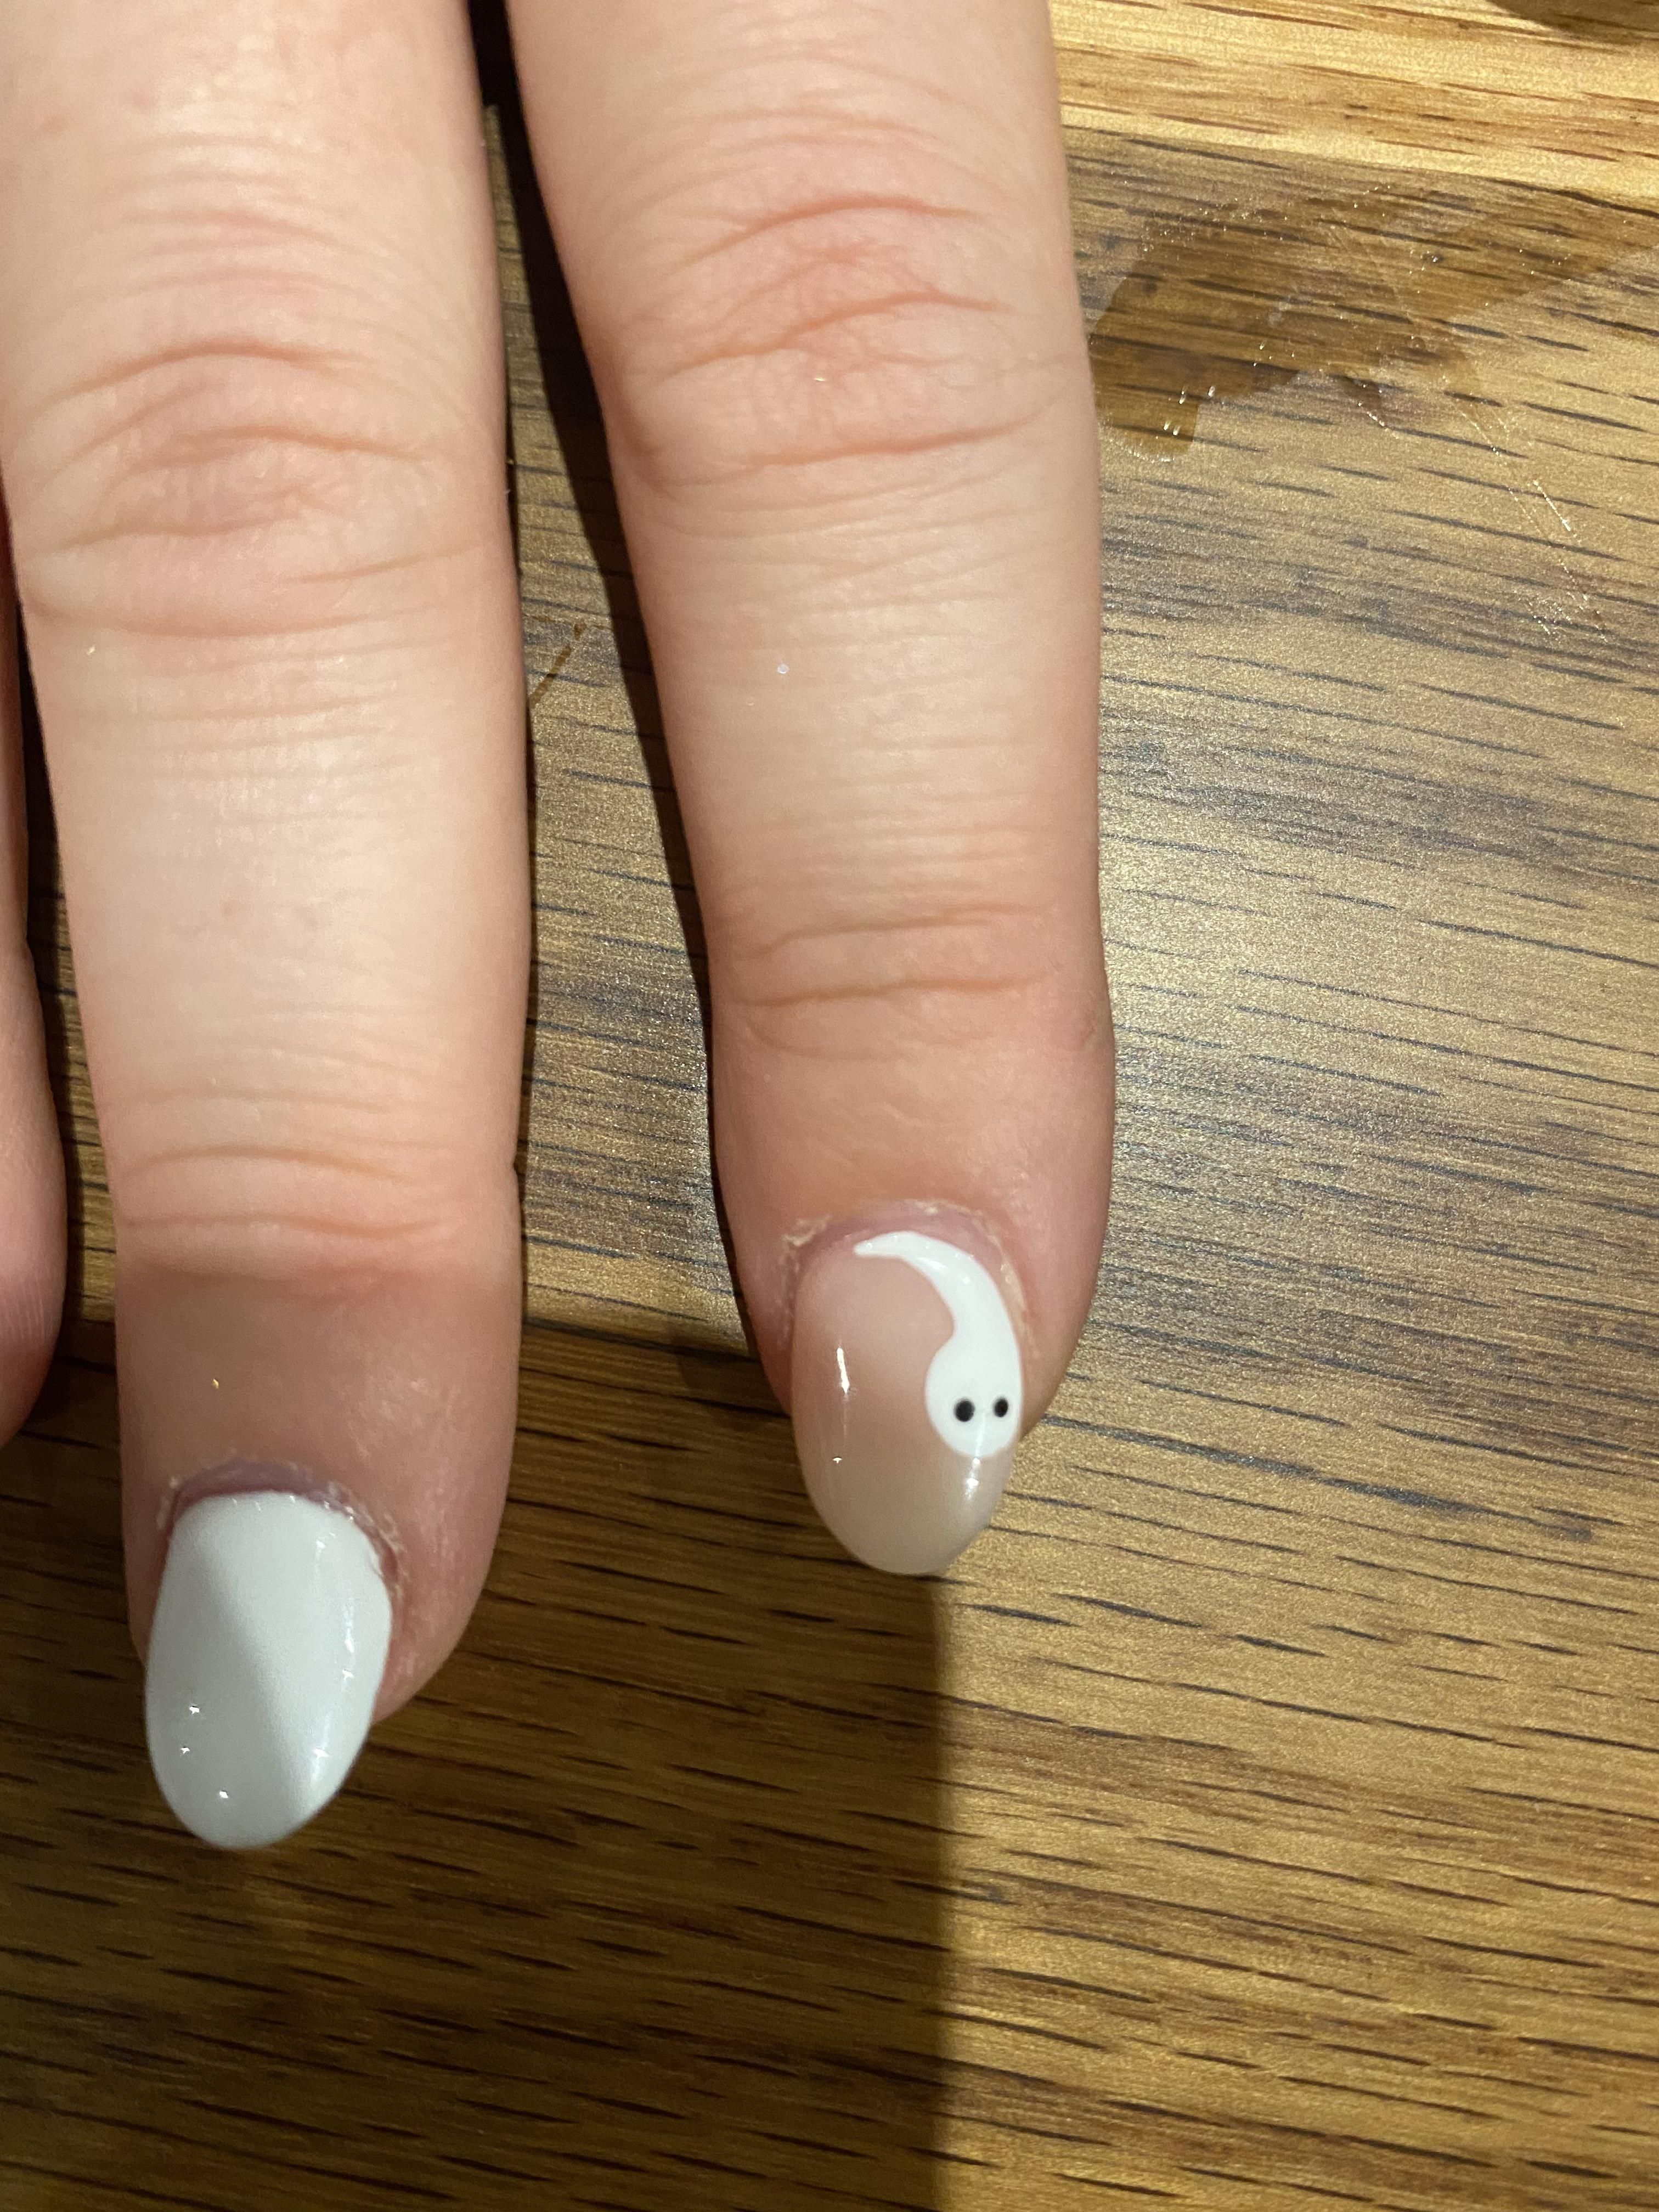 My friend wanted ghosts painted on her nails for Halloween. Unfortunately they look like sperm.